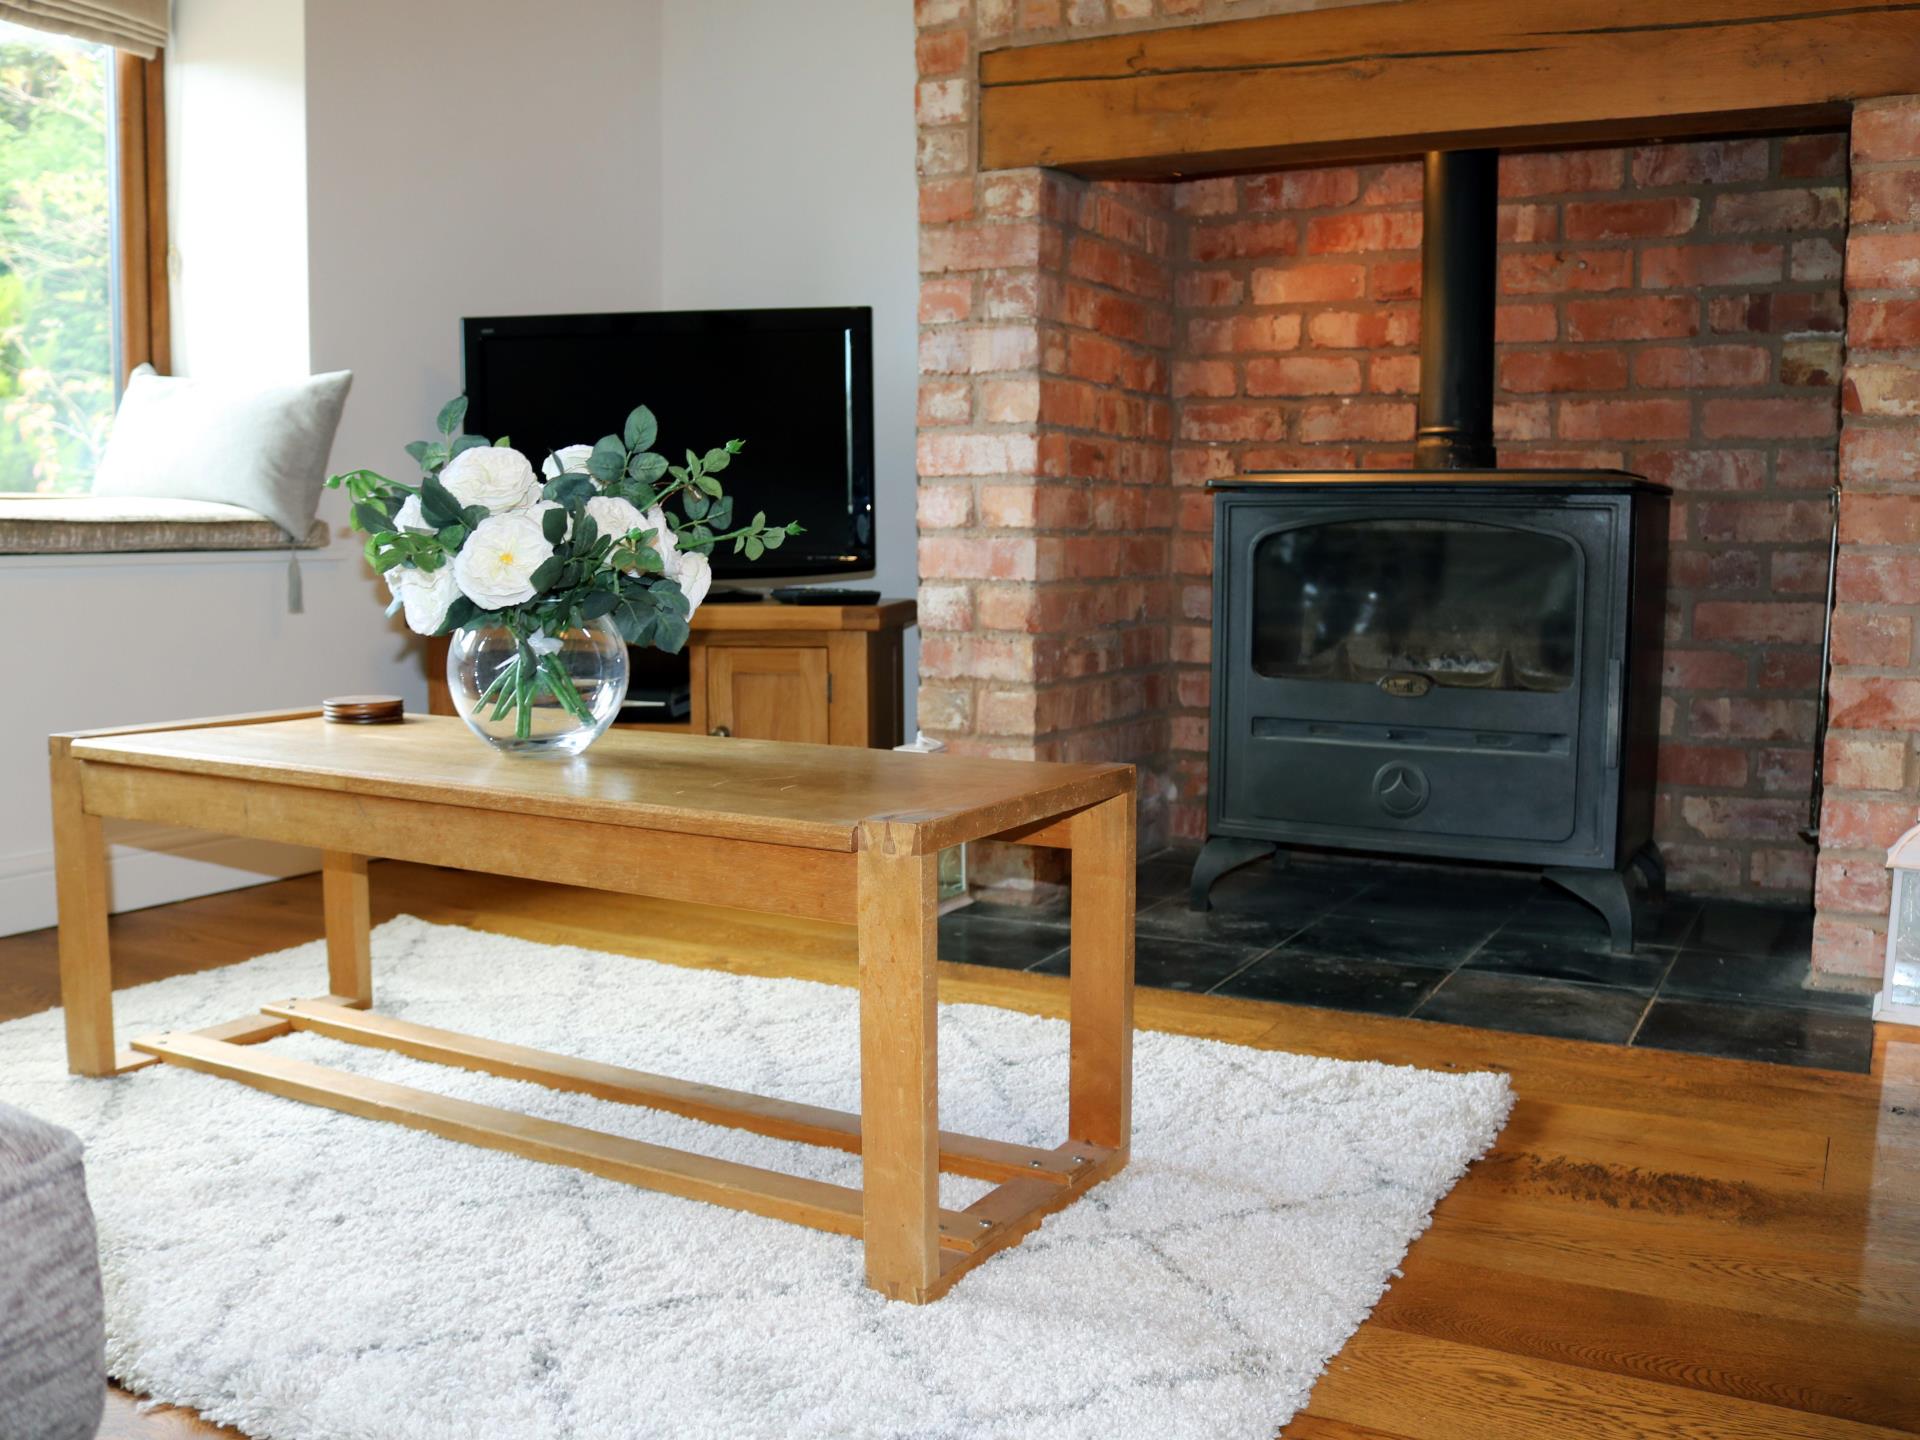 Wood burner and entertainment available